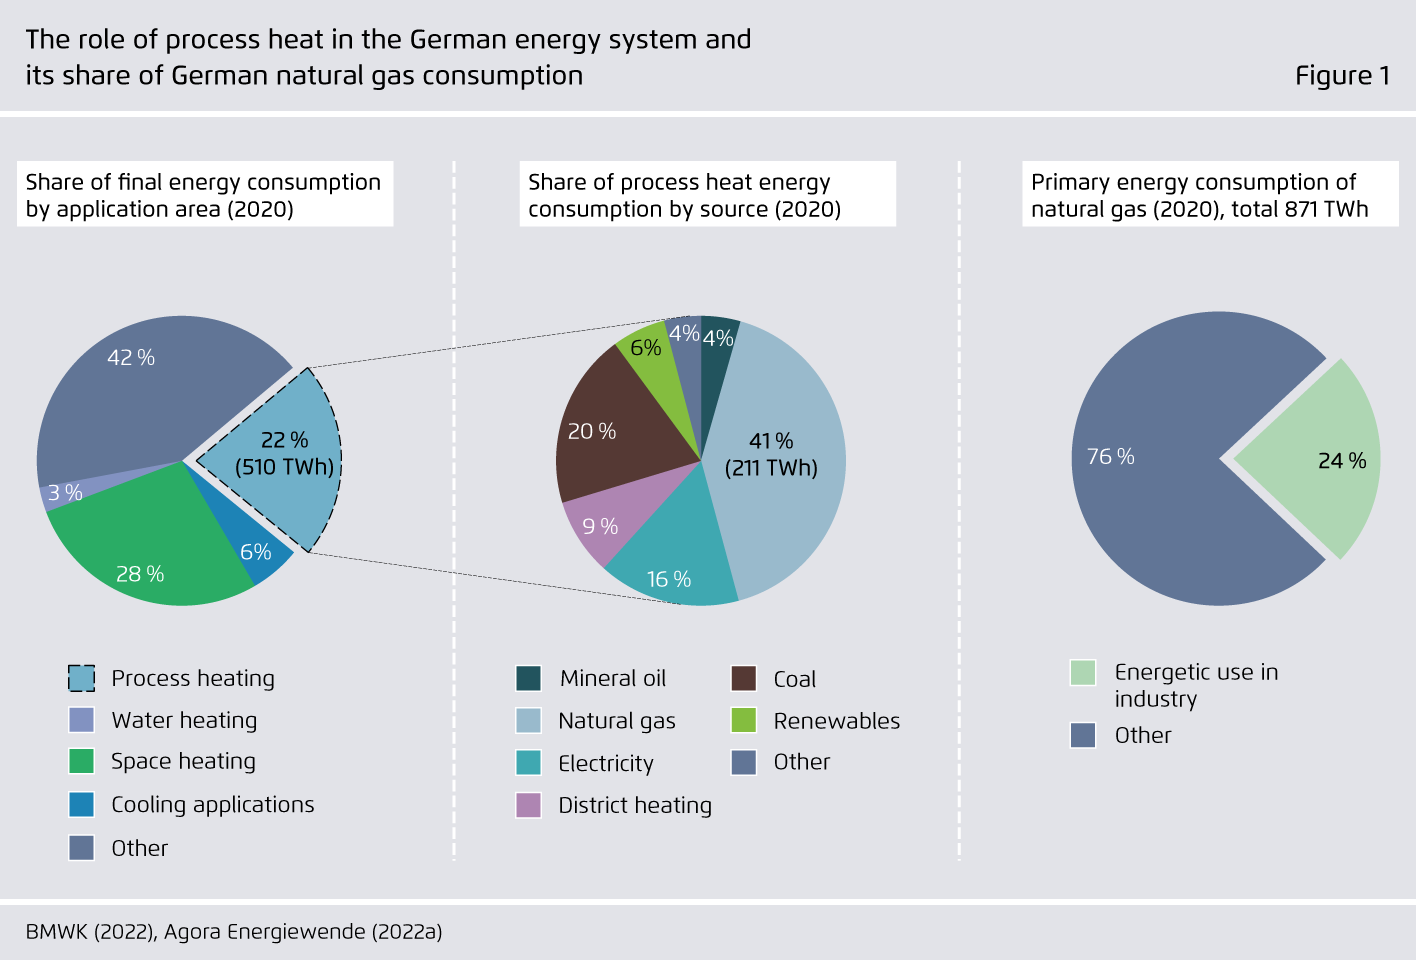 Preview for The role of process heat in the German energy system and its share of German natural gas consumption